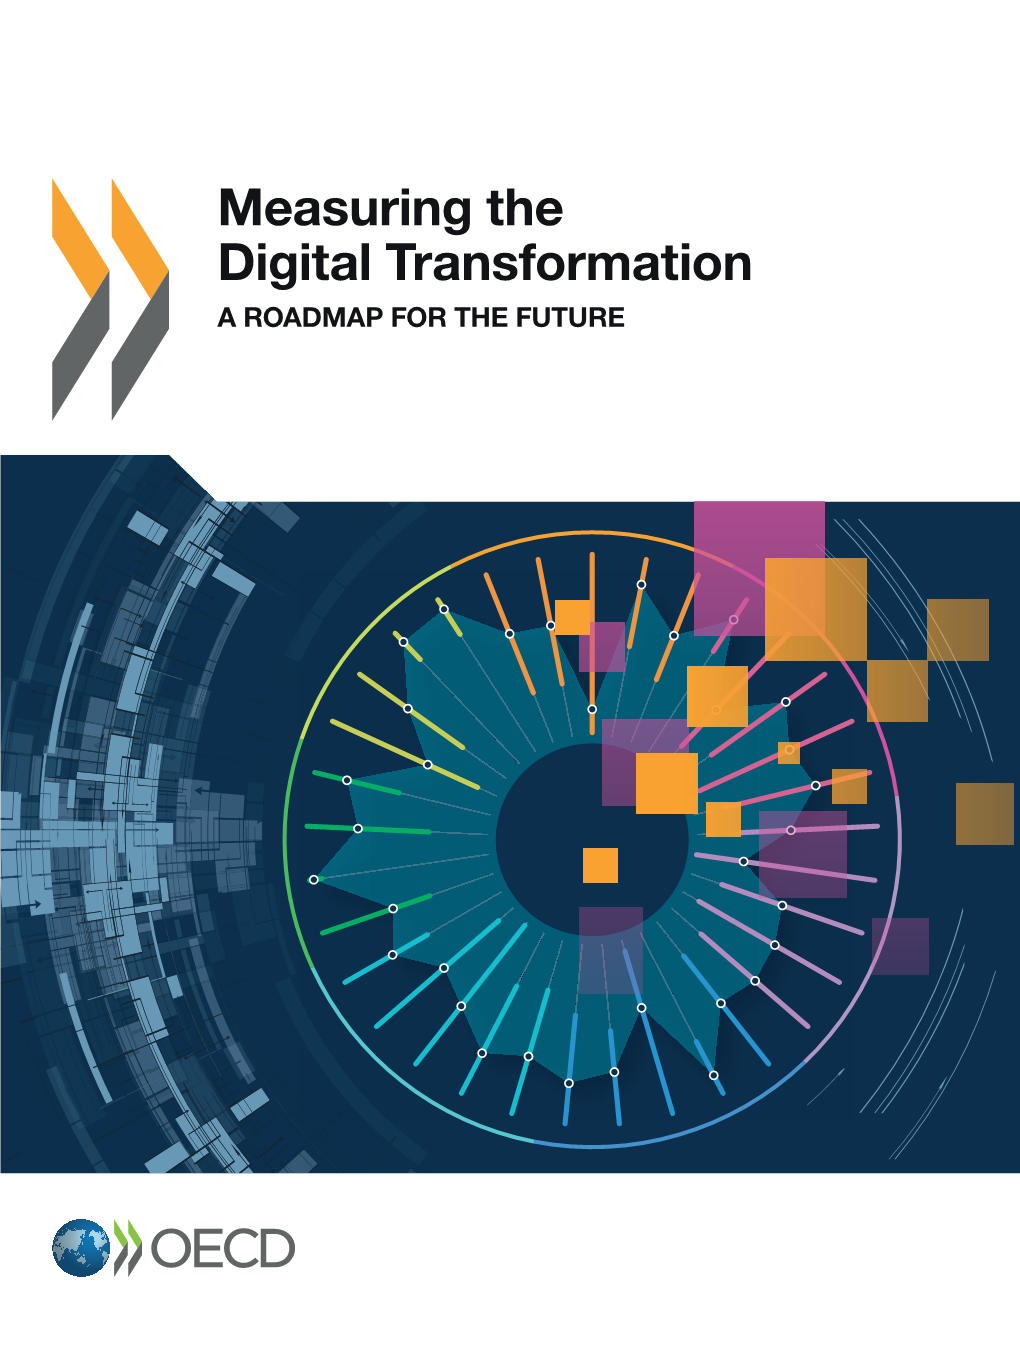 Measuring the Digital Transformation a ROADMAP for the FUTURE